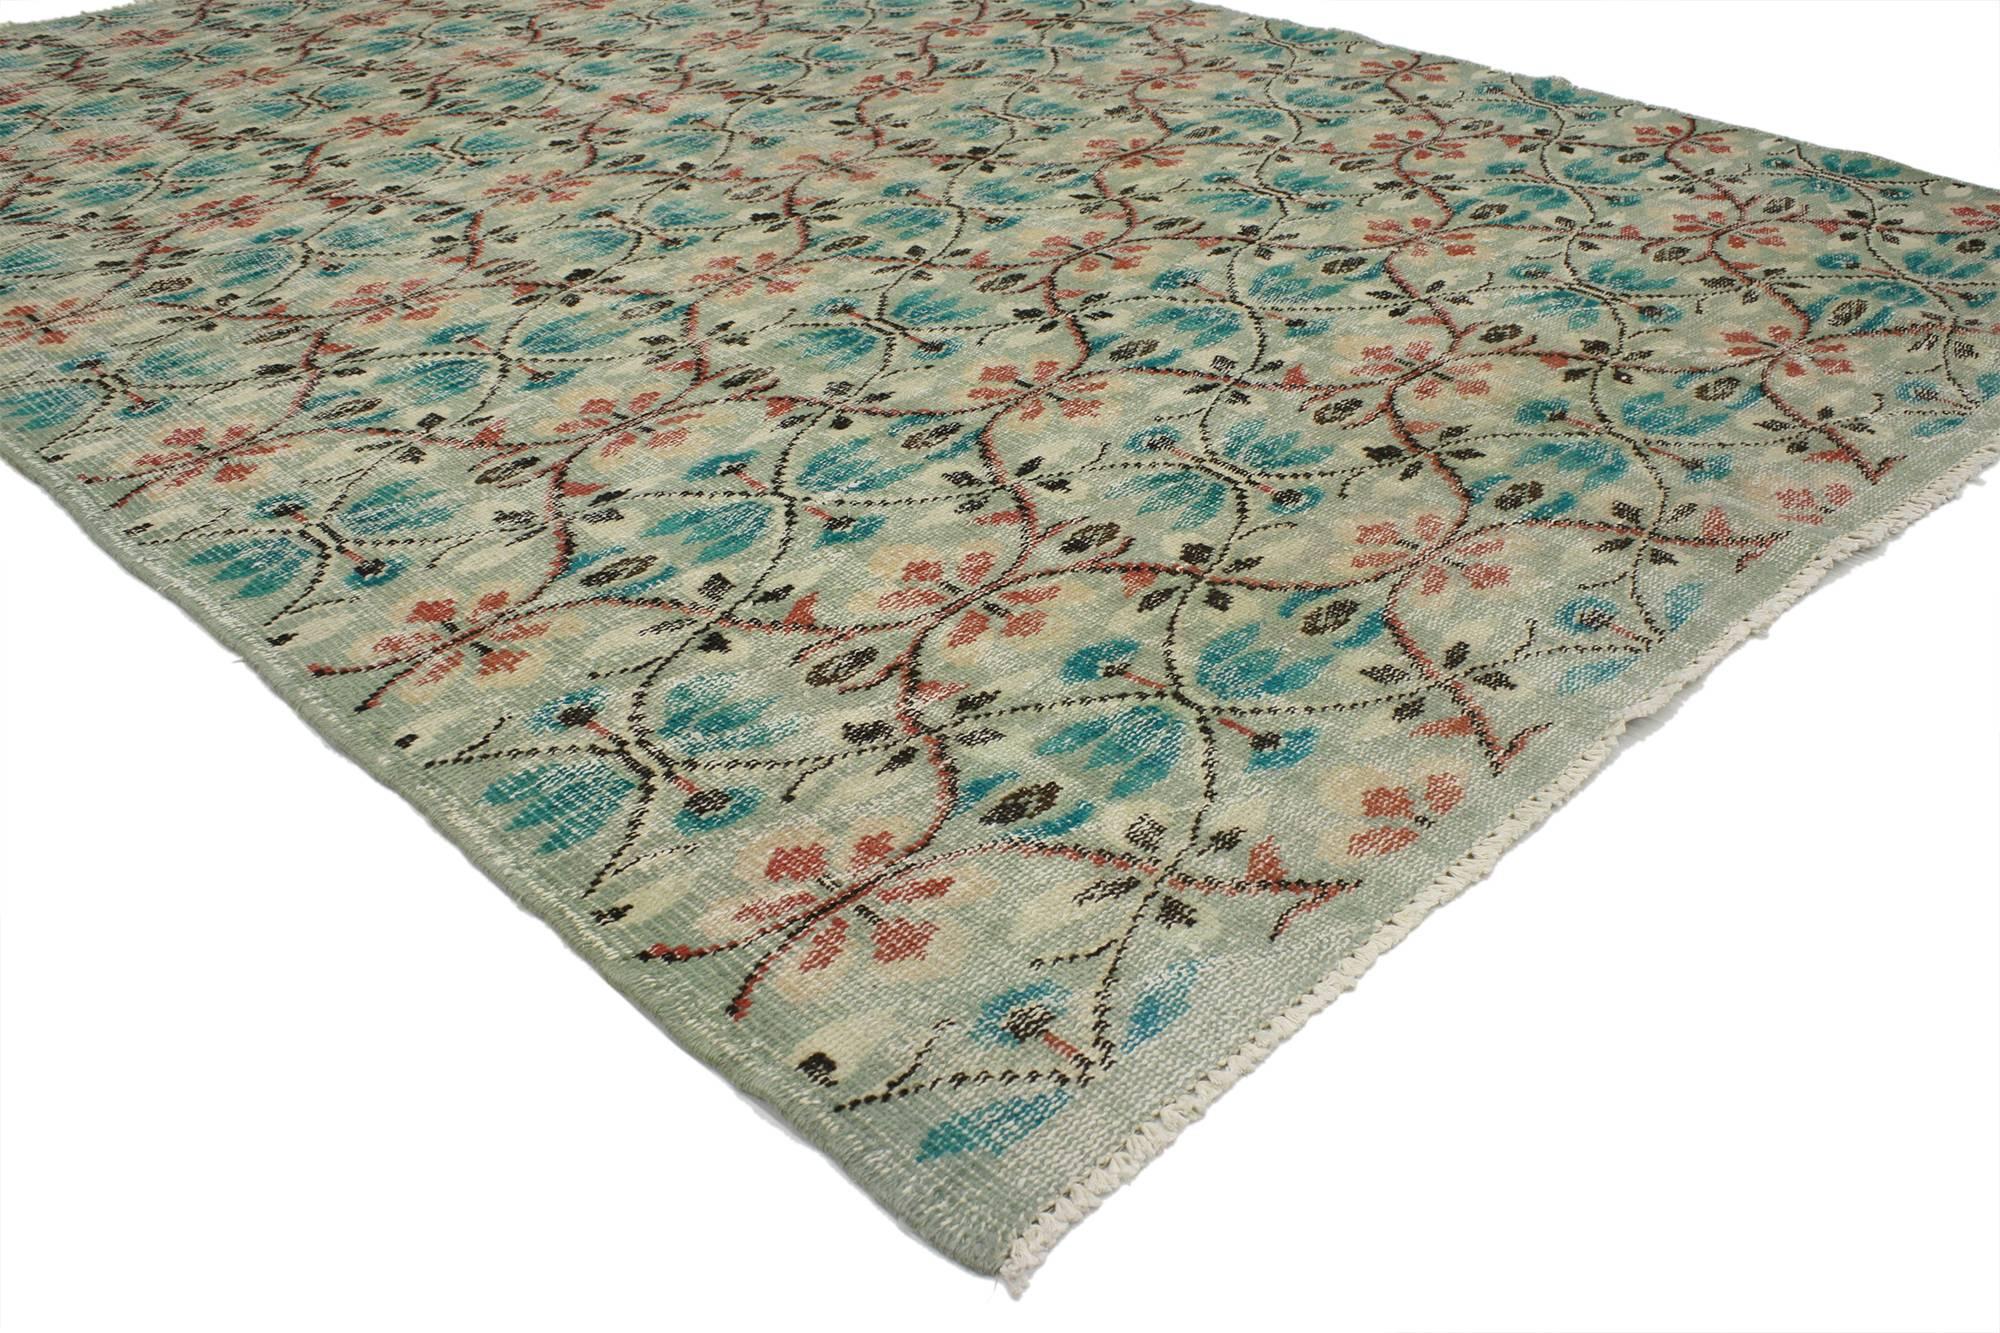 51999 Distressed Vintage Turkish Sivas Rug with Shabby Chic Swedish Farmhouse Style 06'01 x 09'00.Lovingly timeworn with shabby chic vibes, this hand knotted wool distressed Turkish Sivas rug beautifully embodies a Swedish Farmhouse style. The